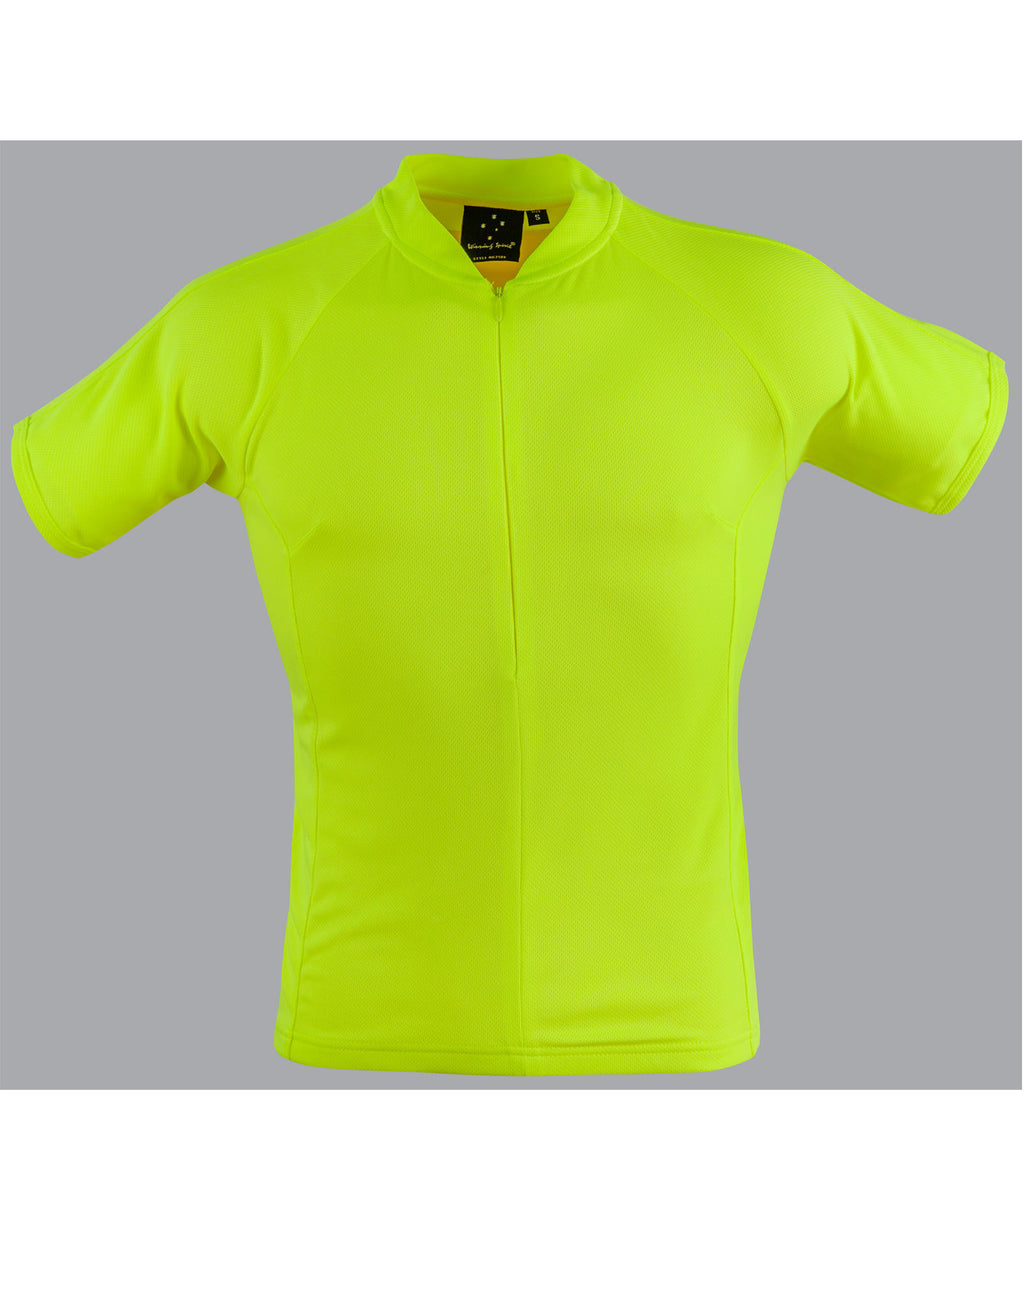 JCTS89 CYCLING TOP